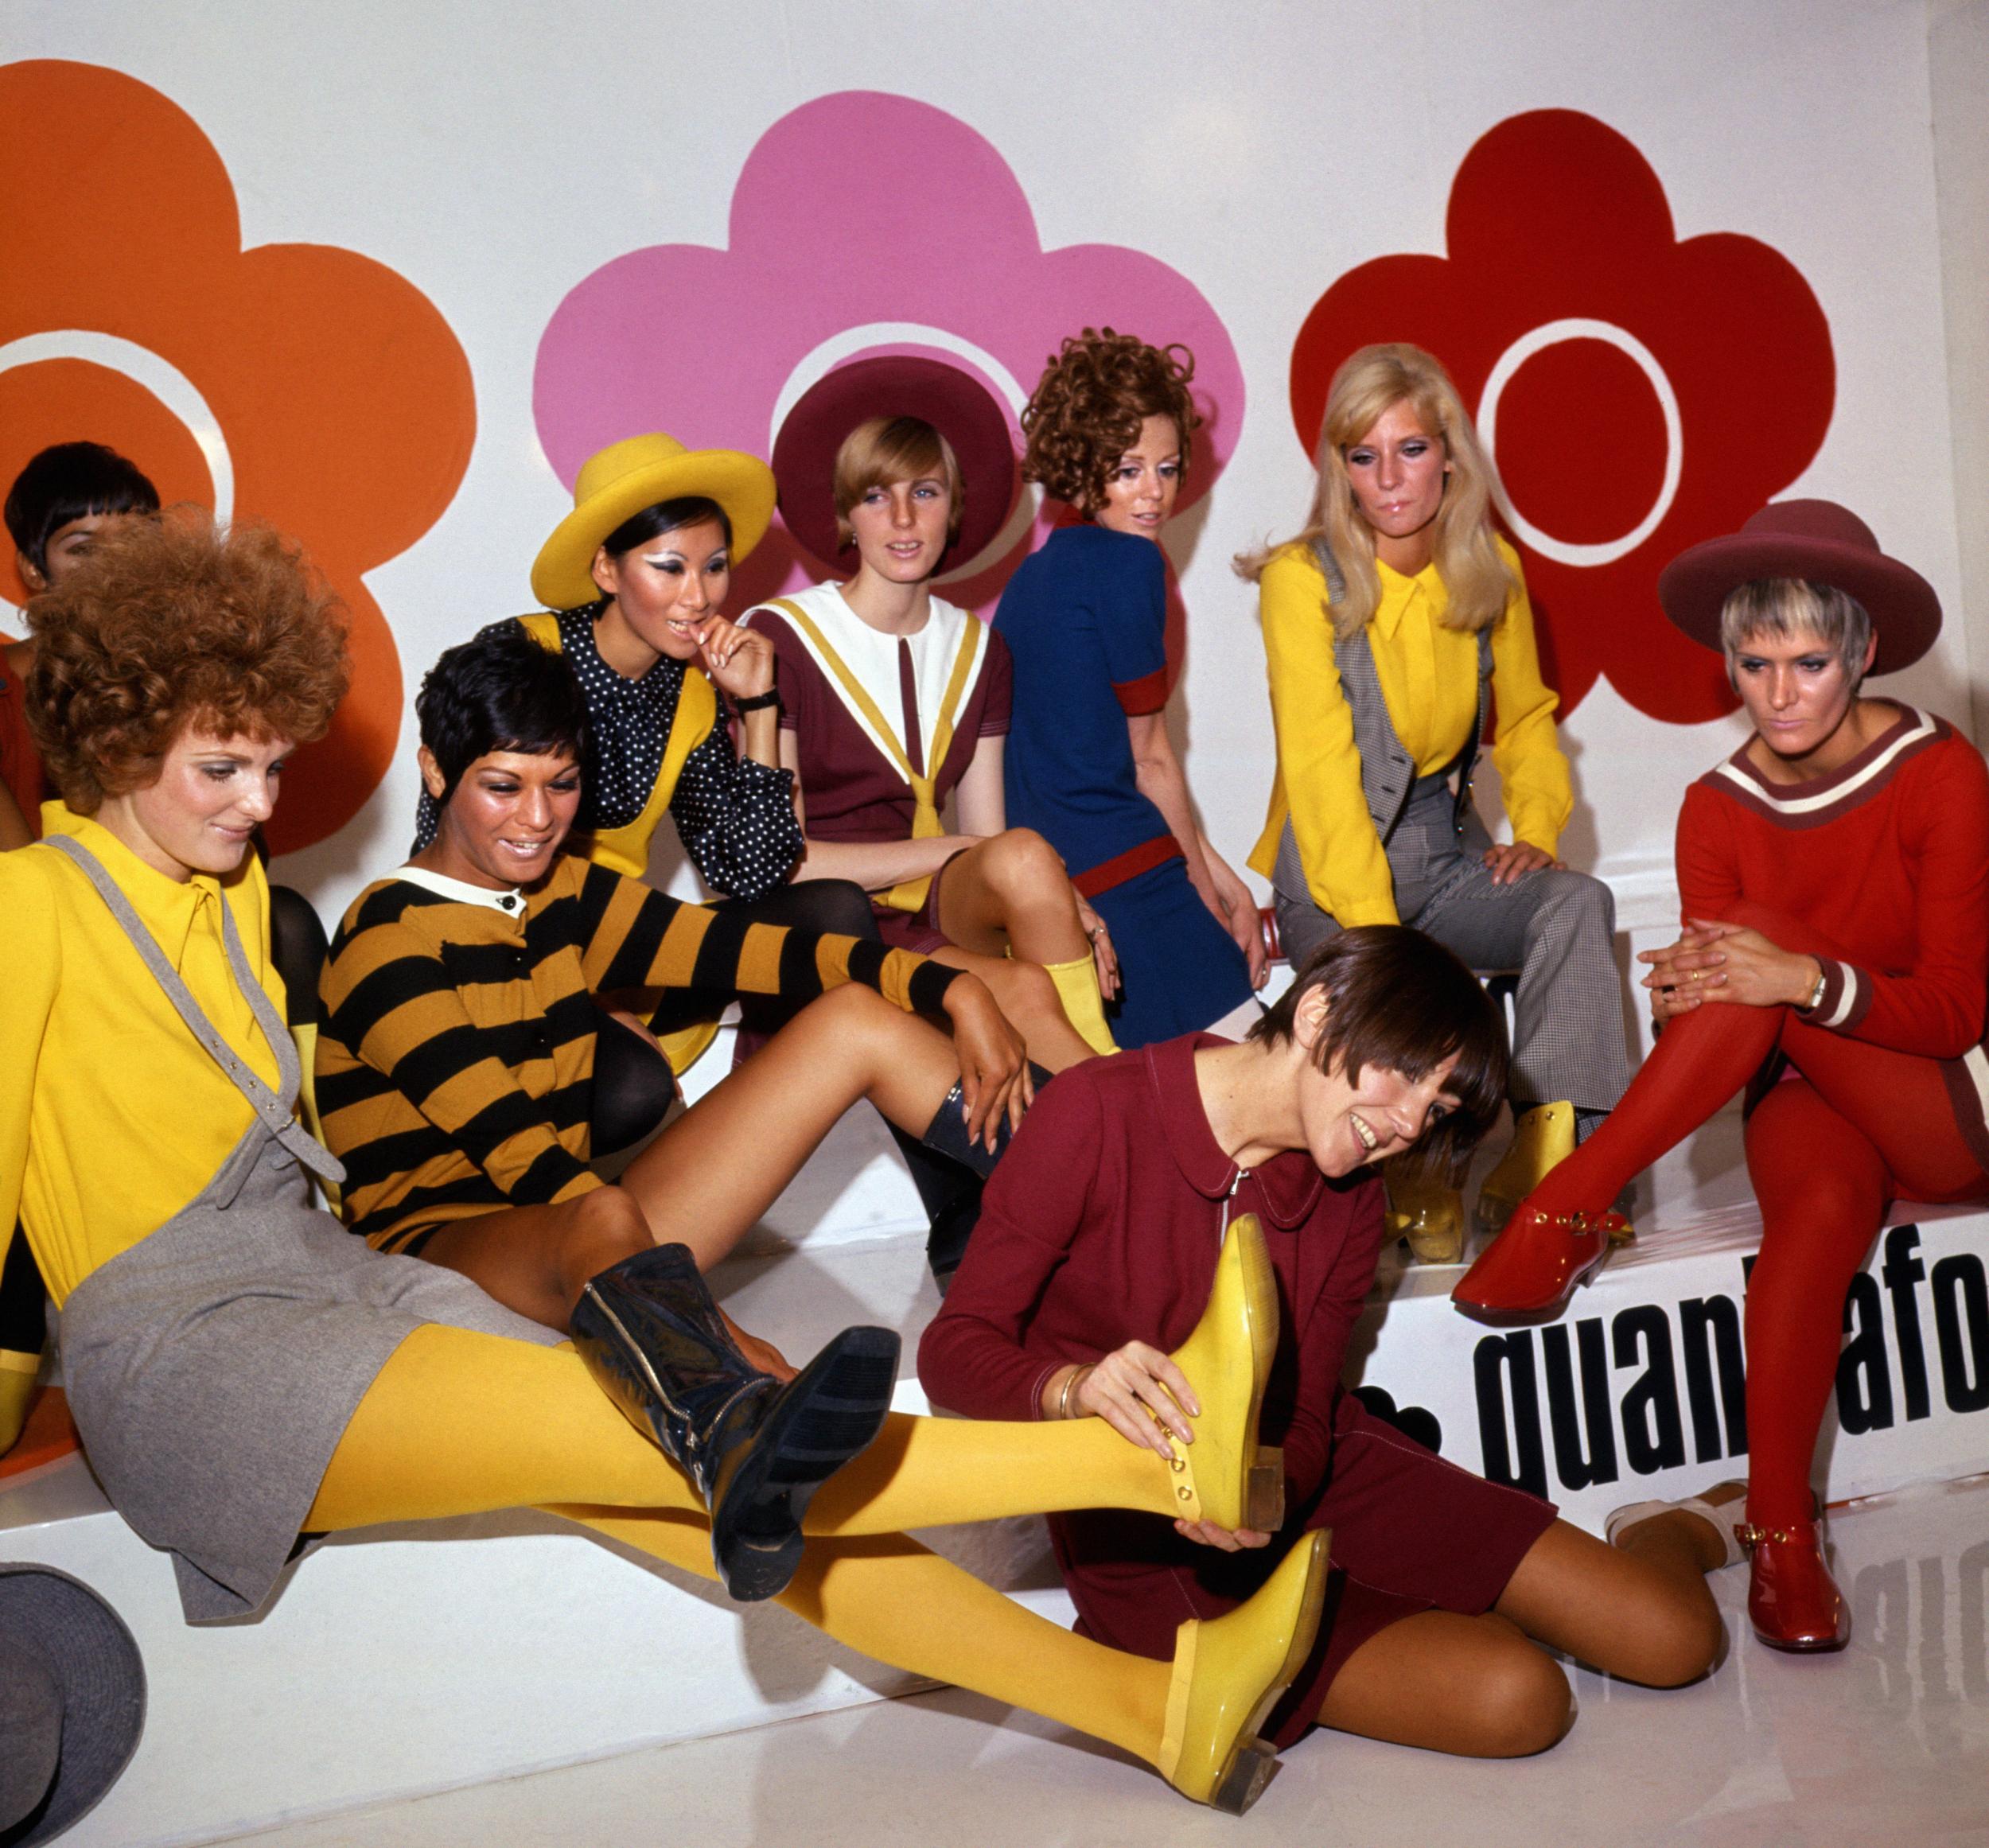 Mary Quant and models at the Quant Afoot footwear collection launch, 1967